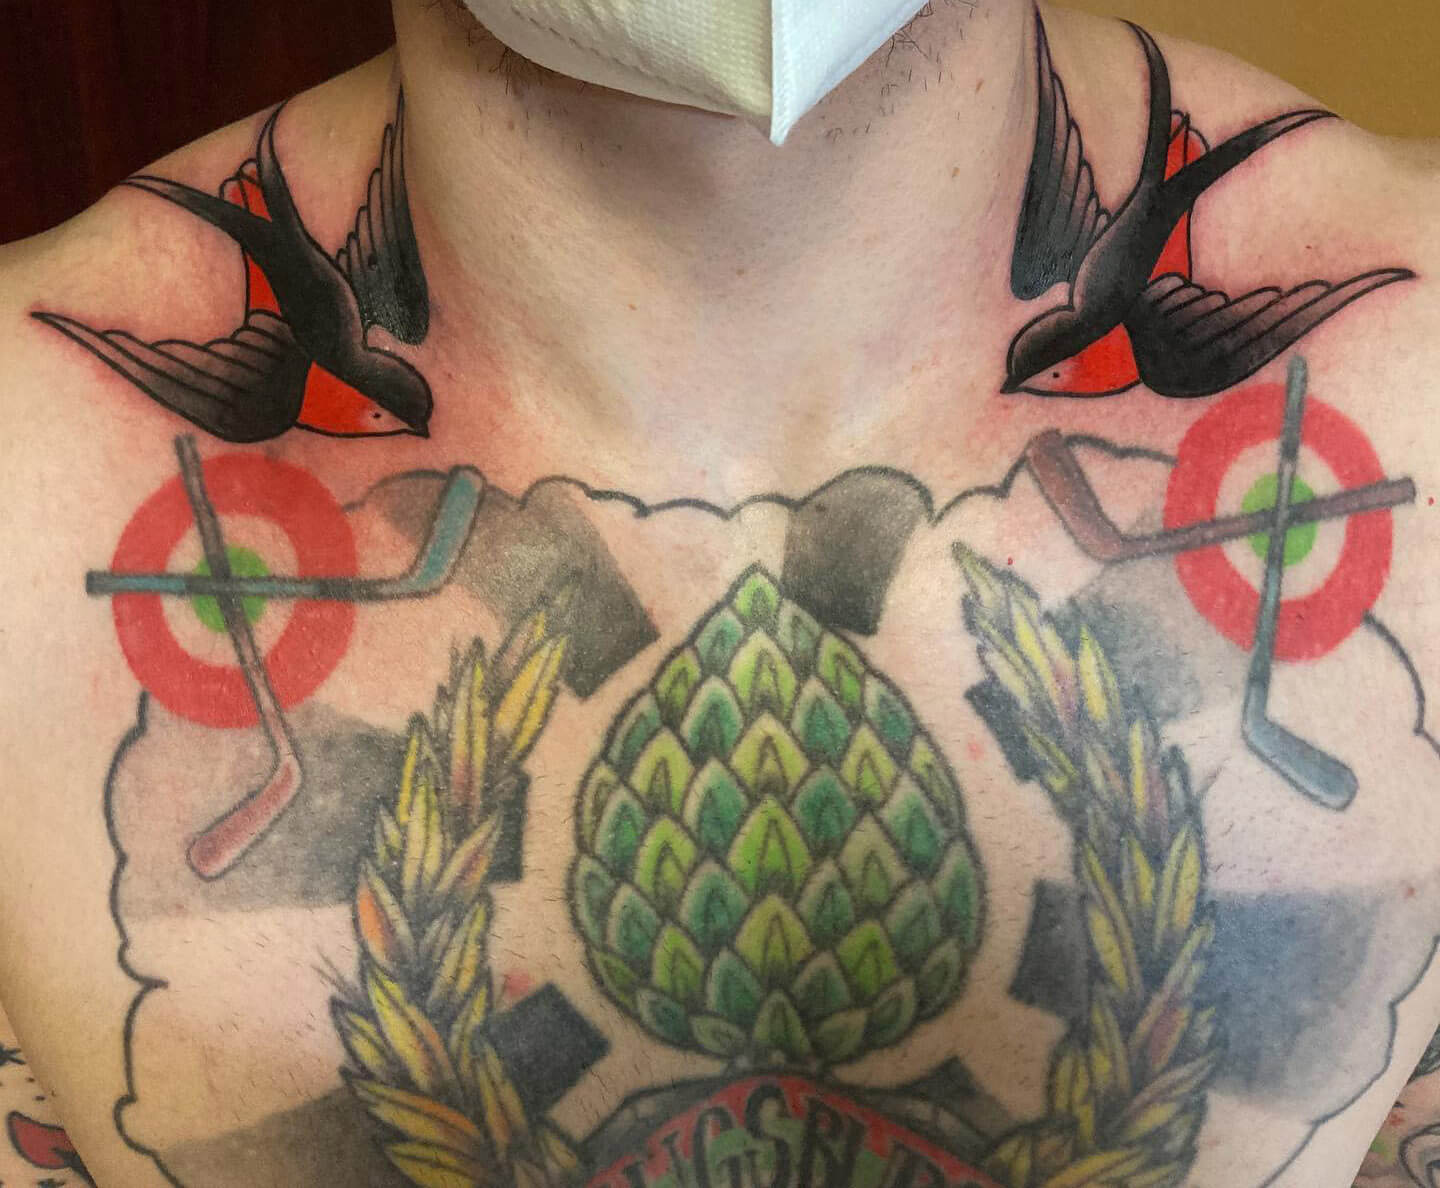 Artichoke Tattoo on the Chest 4 Artichoke Tattoo: Everything You Need To Know (30+ Cool Design Ideas)